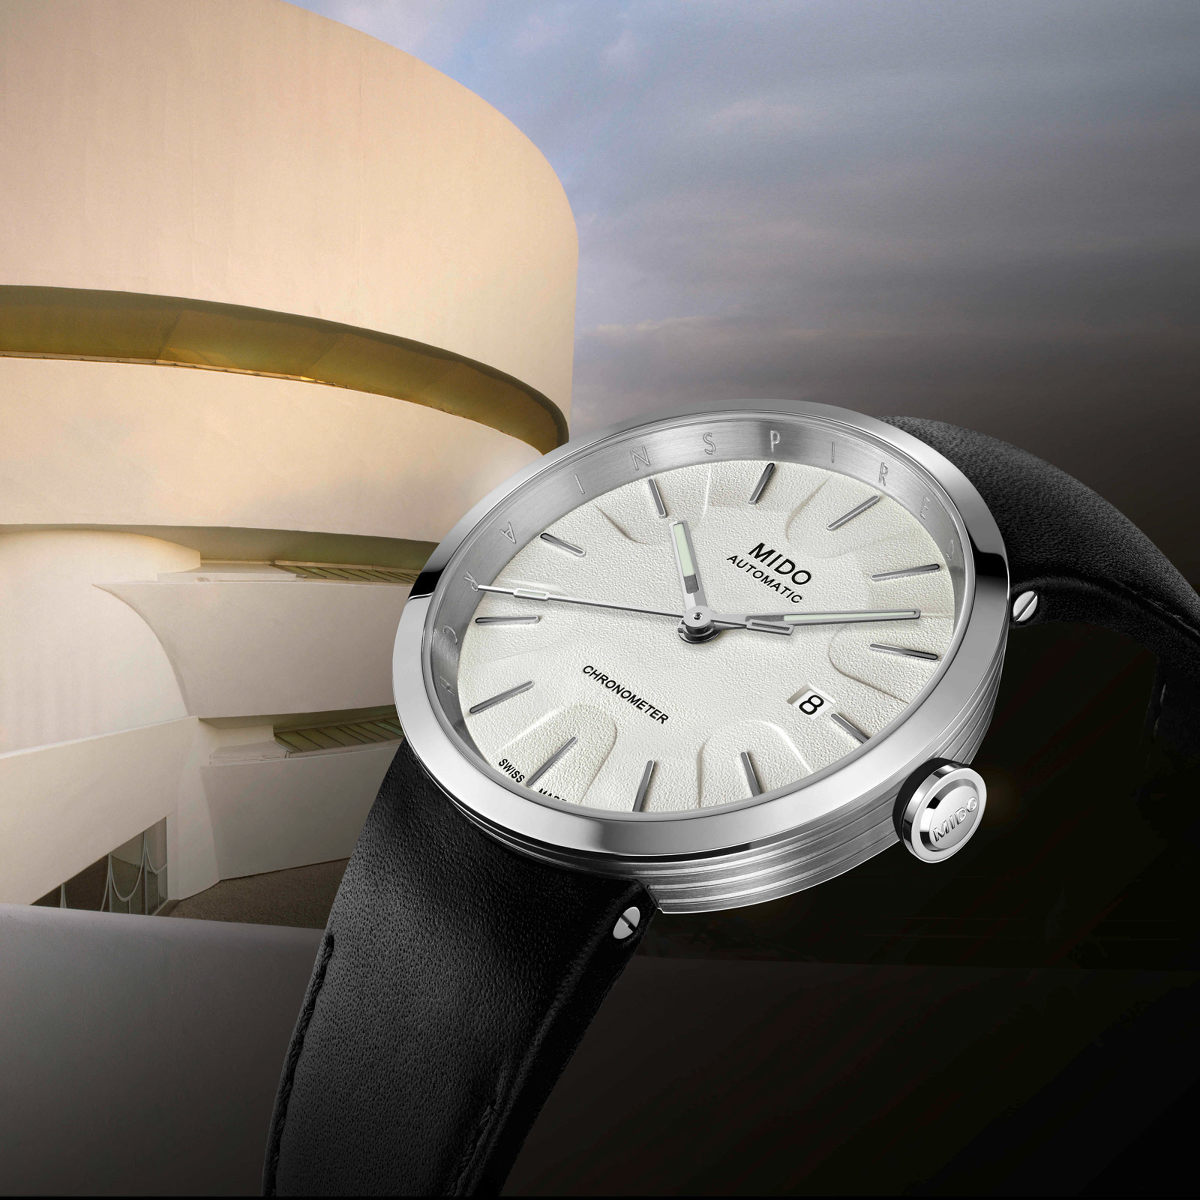 Mido Inspired By Architecture Limited Edition | www.timeandwatches.pl